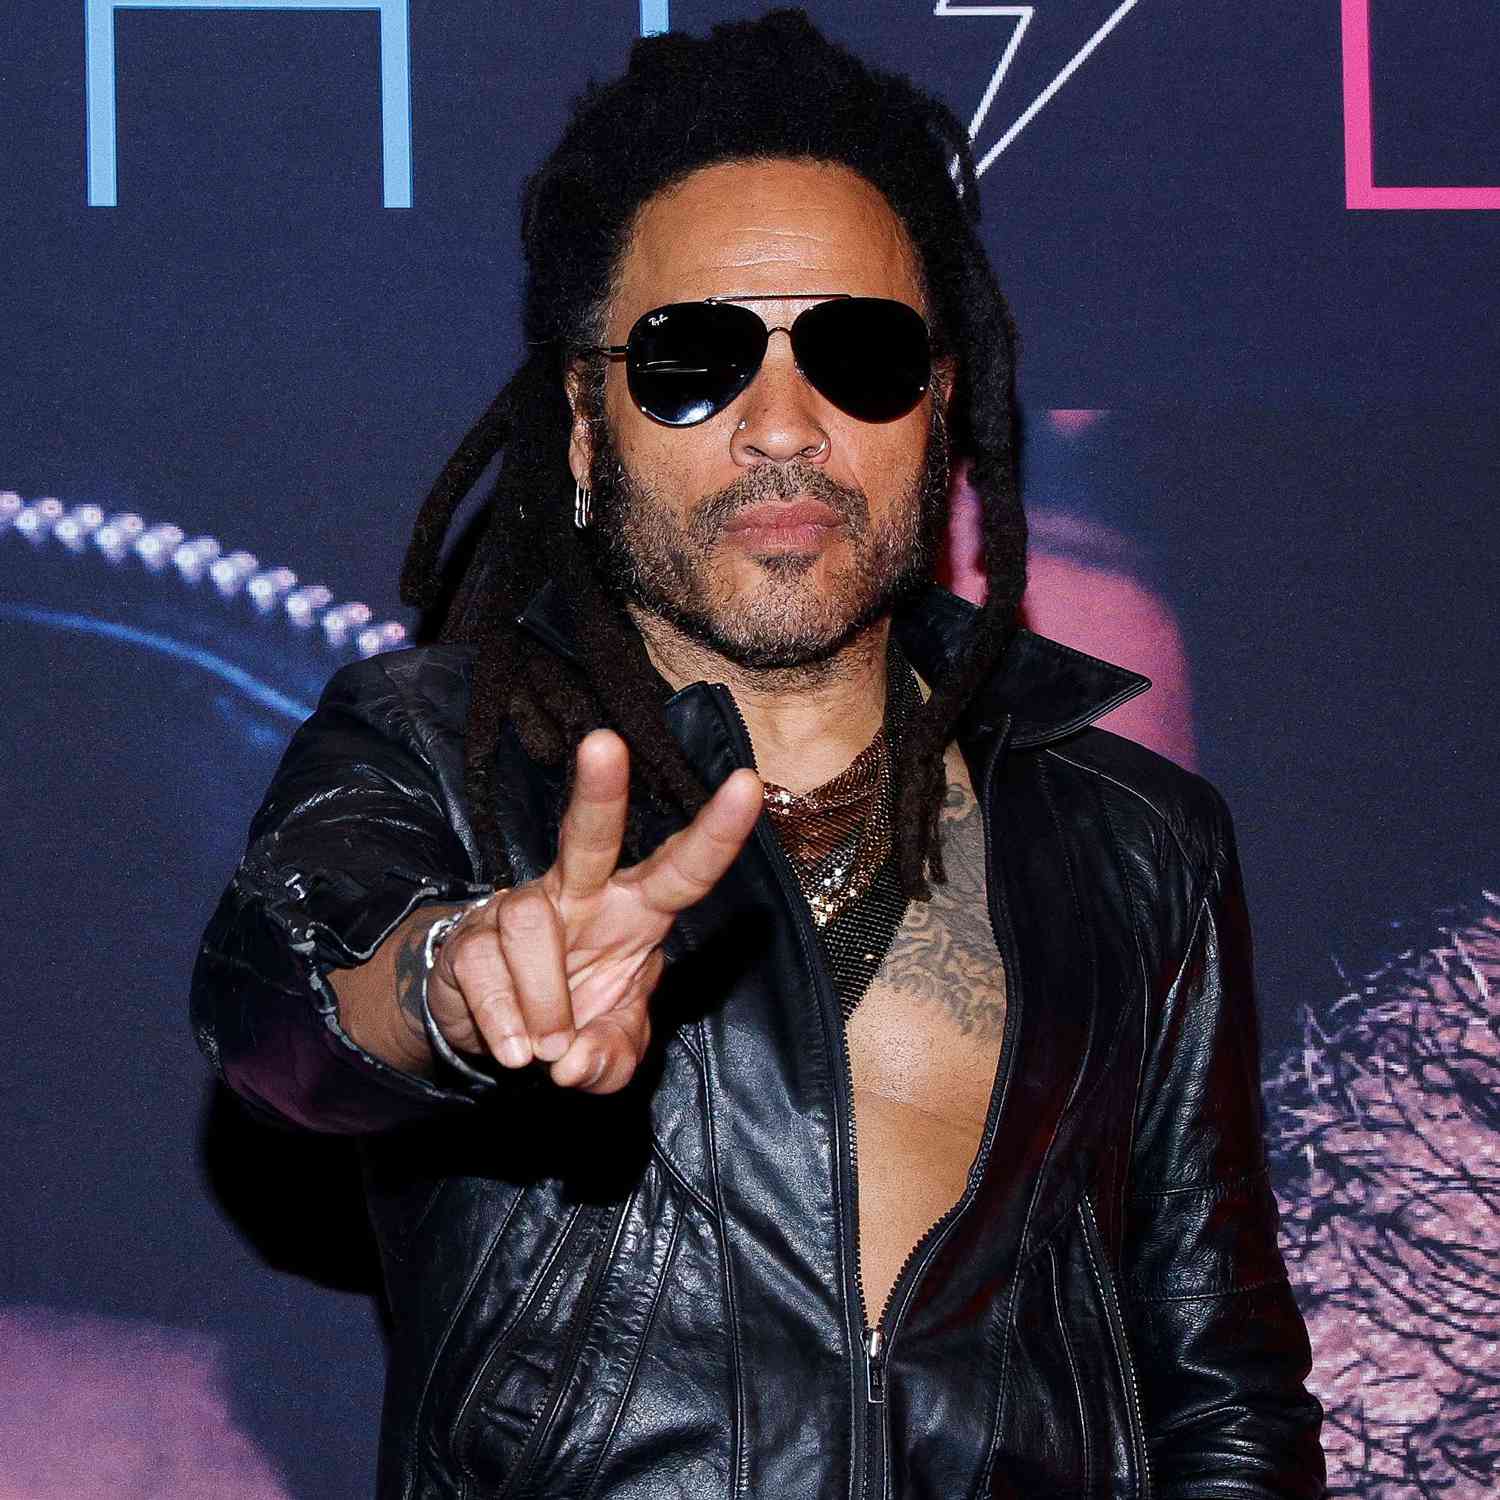 Lenny Kravitz attends a press conference to promote his new album "Blue Electric Light"